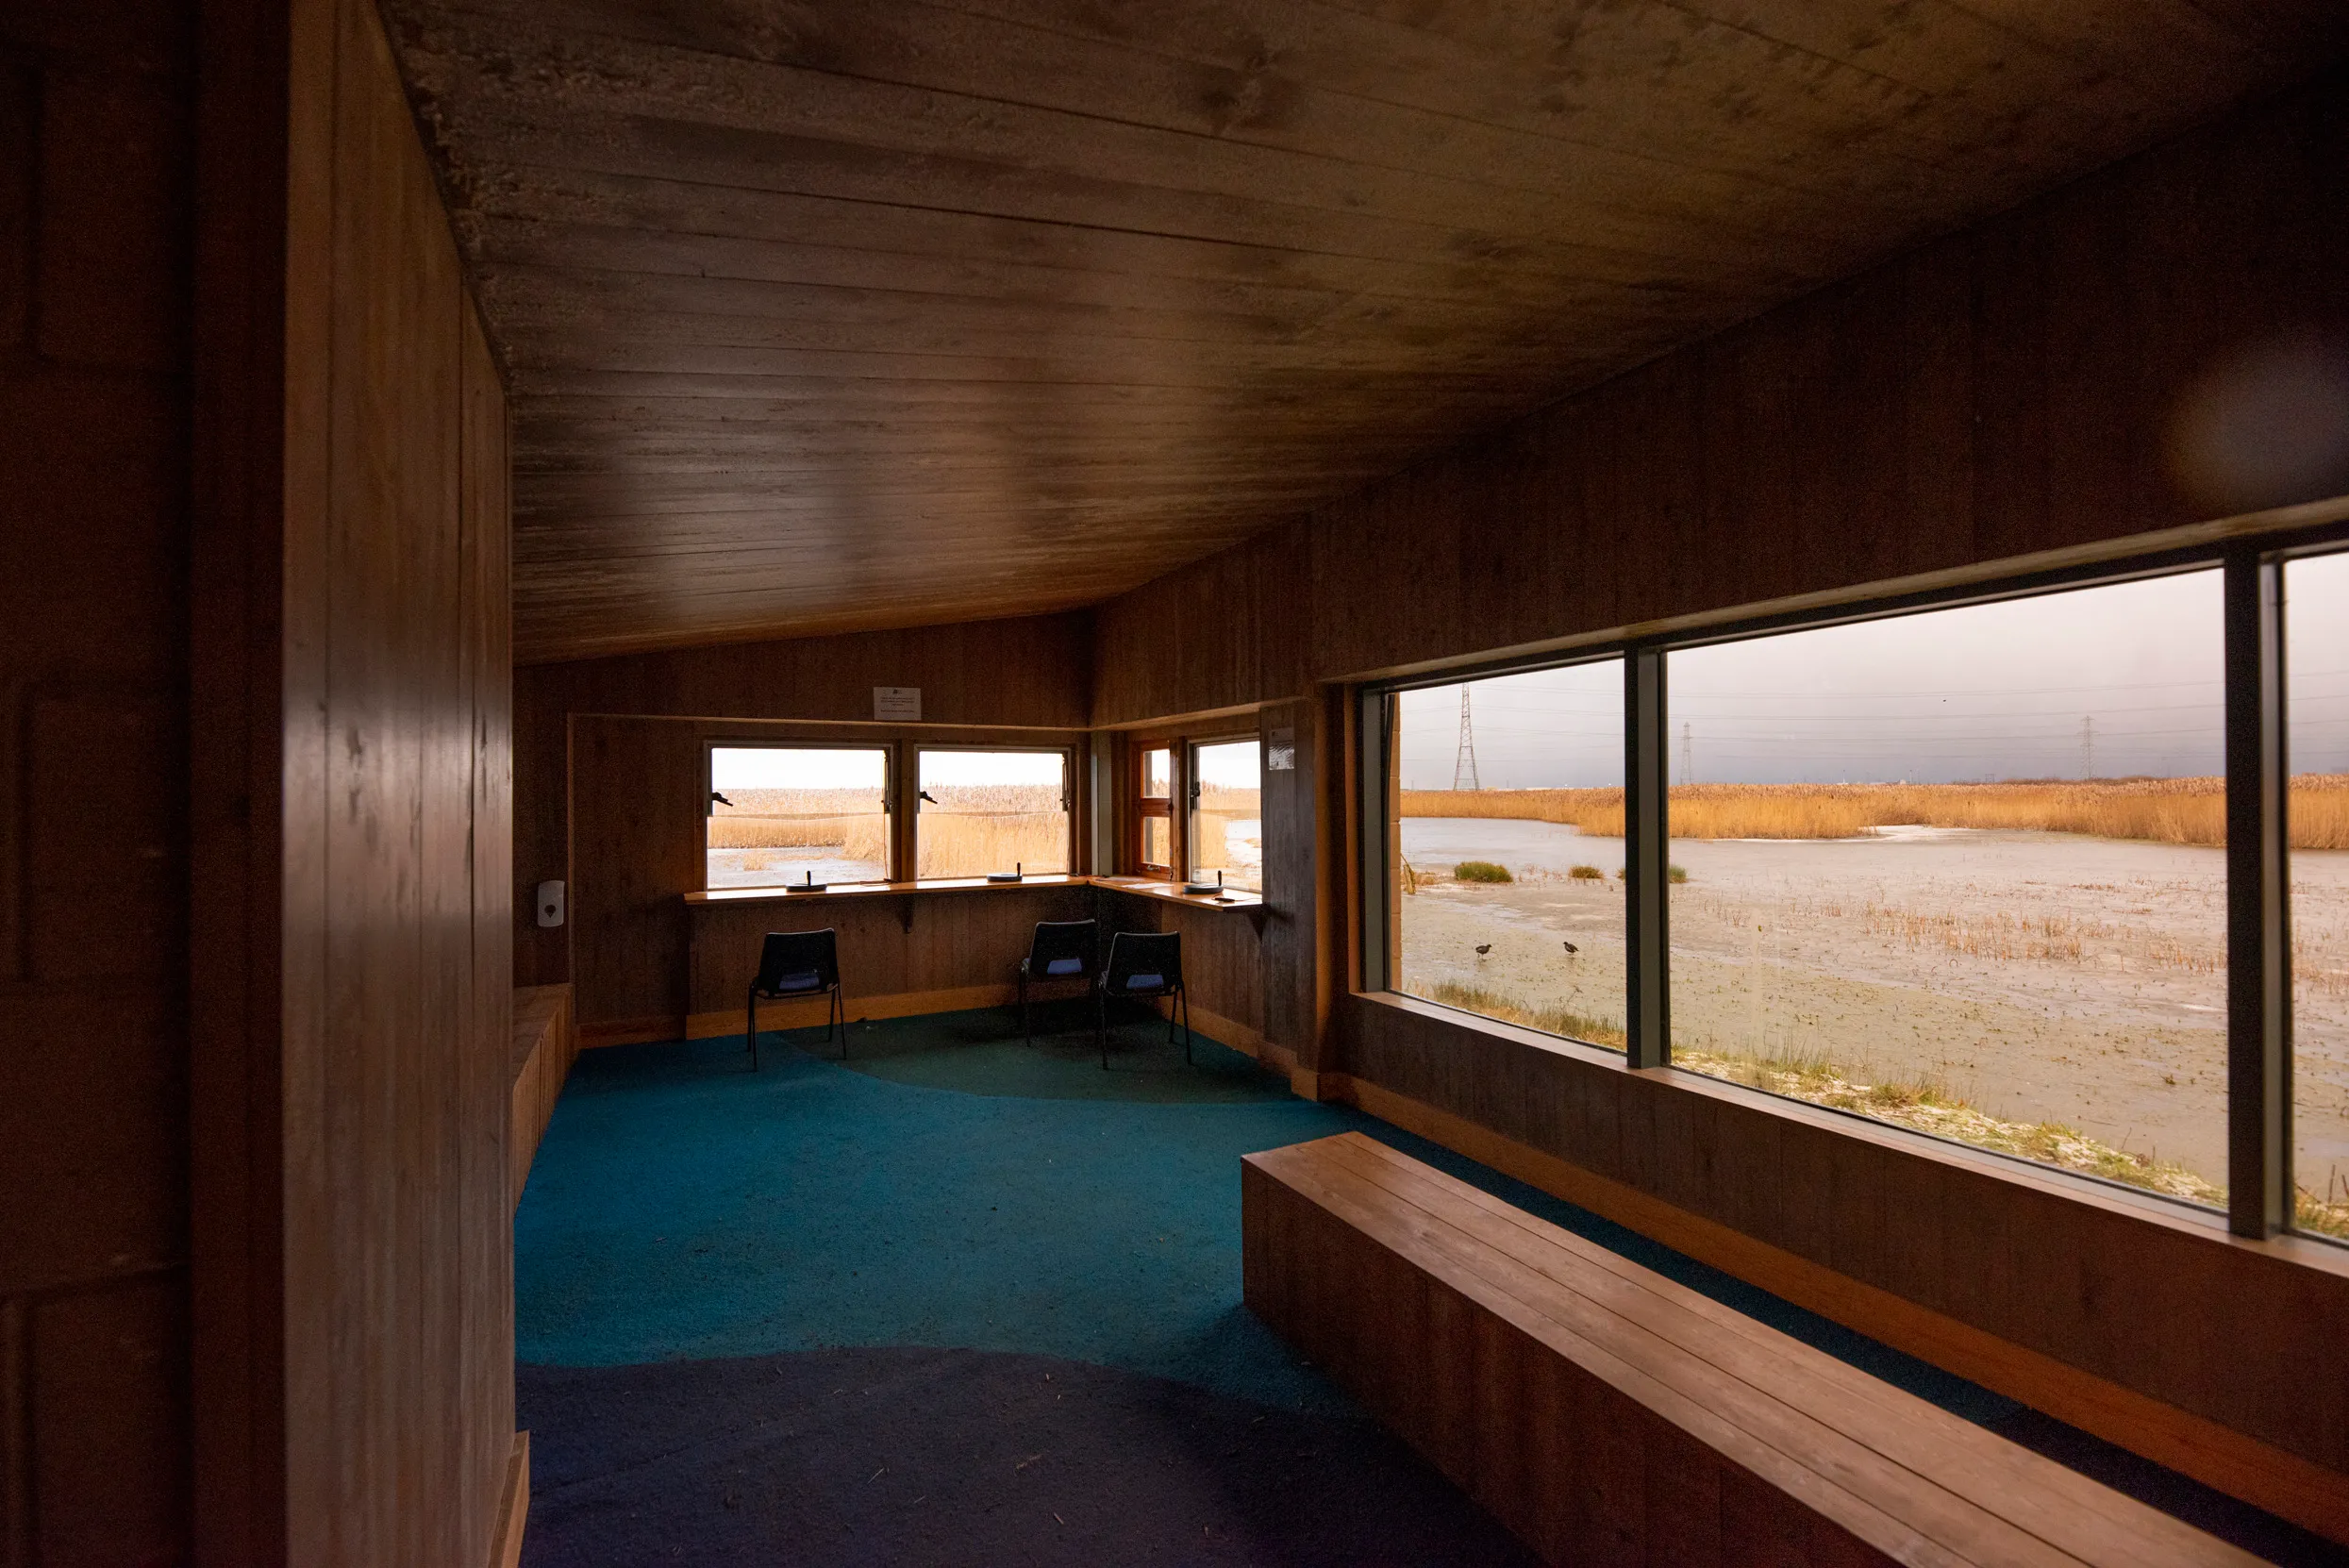 A bird hide at Saltholme in winter, with seating and carpeted floors, and a view out to a large area of wetland and wildlife